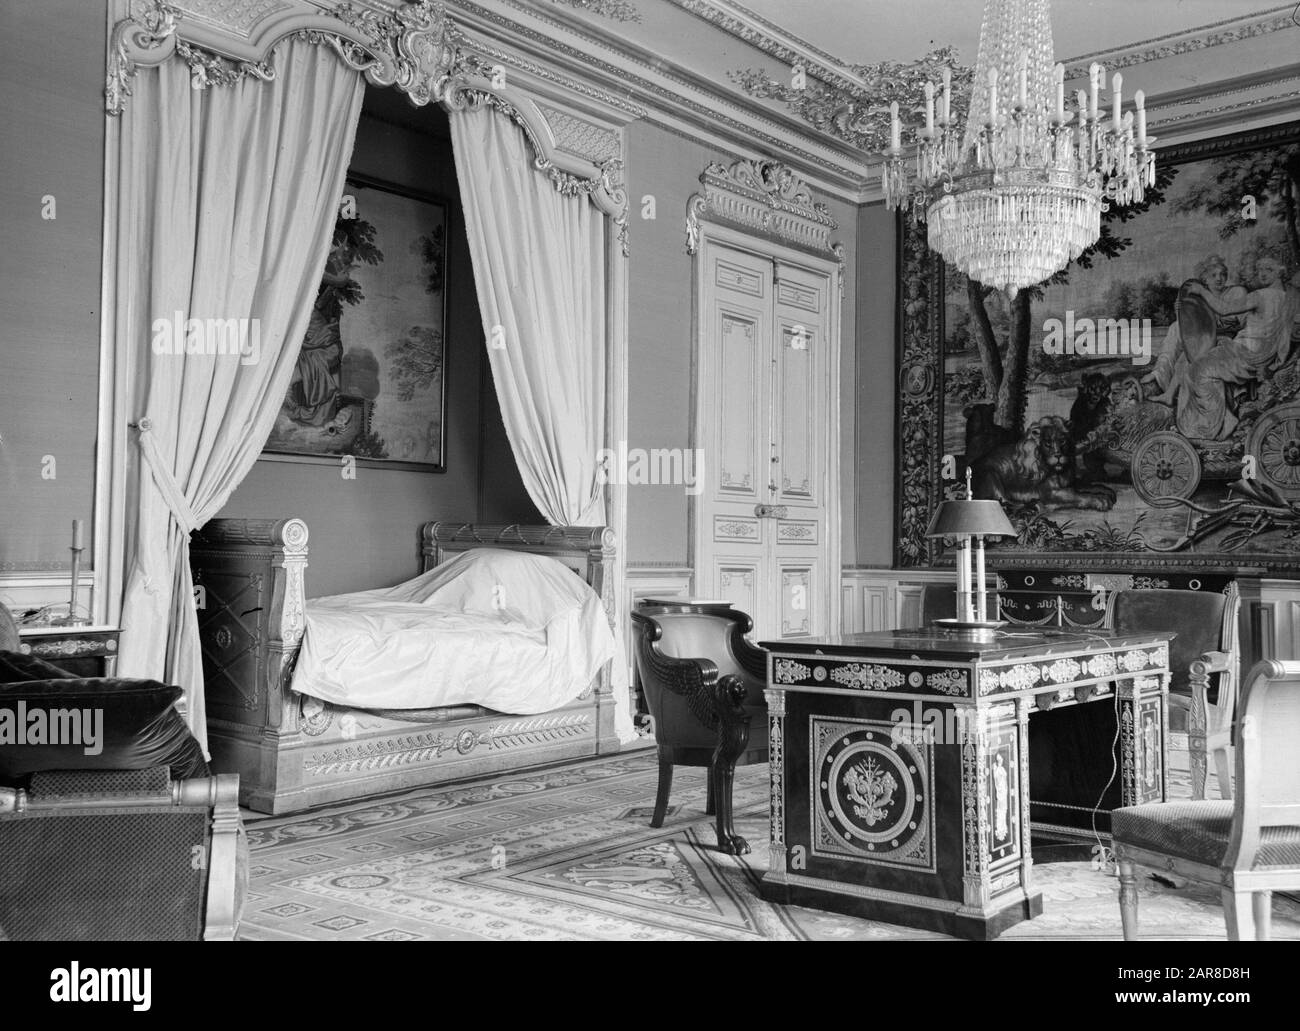 Bedroom in a palace (Elysée in Paris?) Date: 1938 Location: France, Paris Keywords: beds, interior, palaces, bedrooms, chairs, tables Institution name: Palais d'Orsay Stock Photo